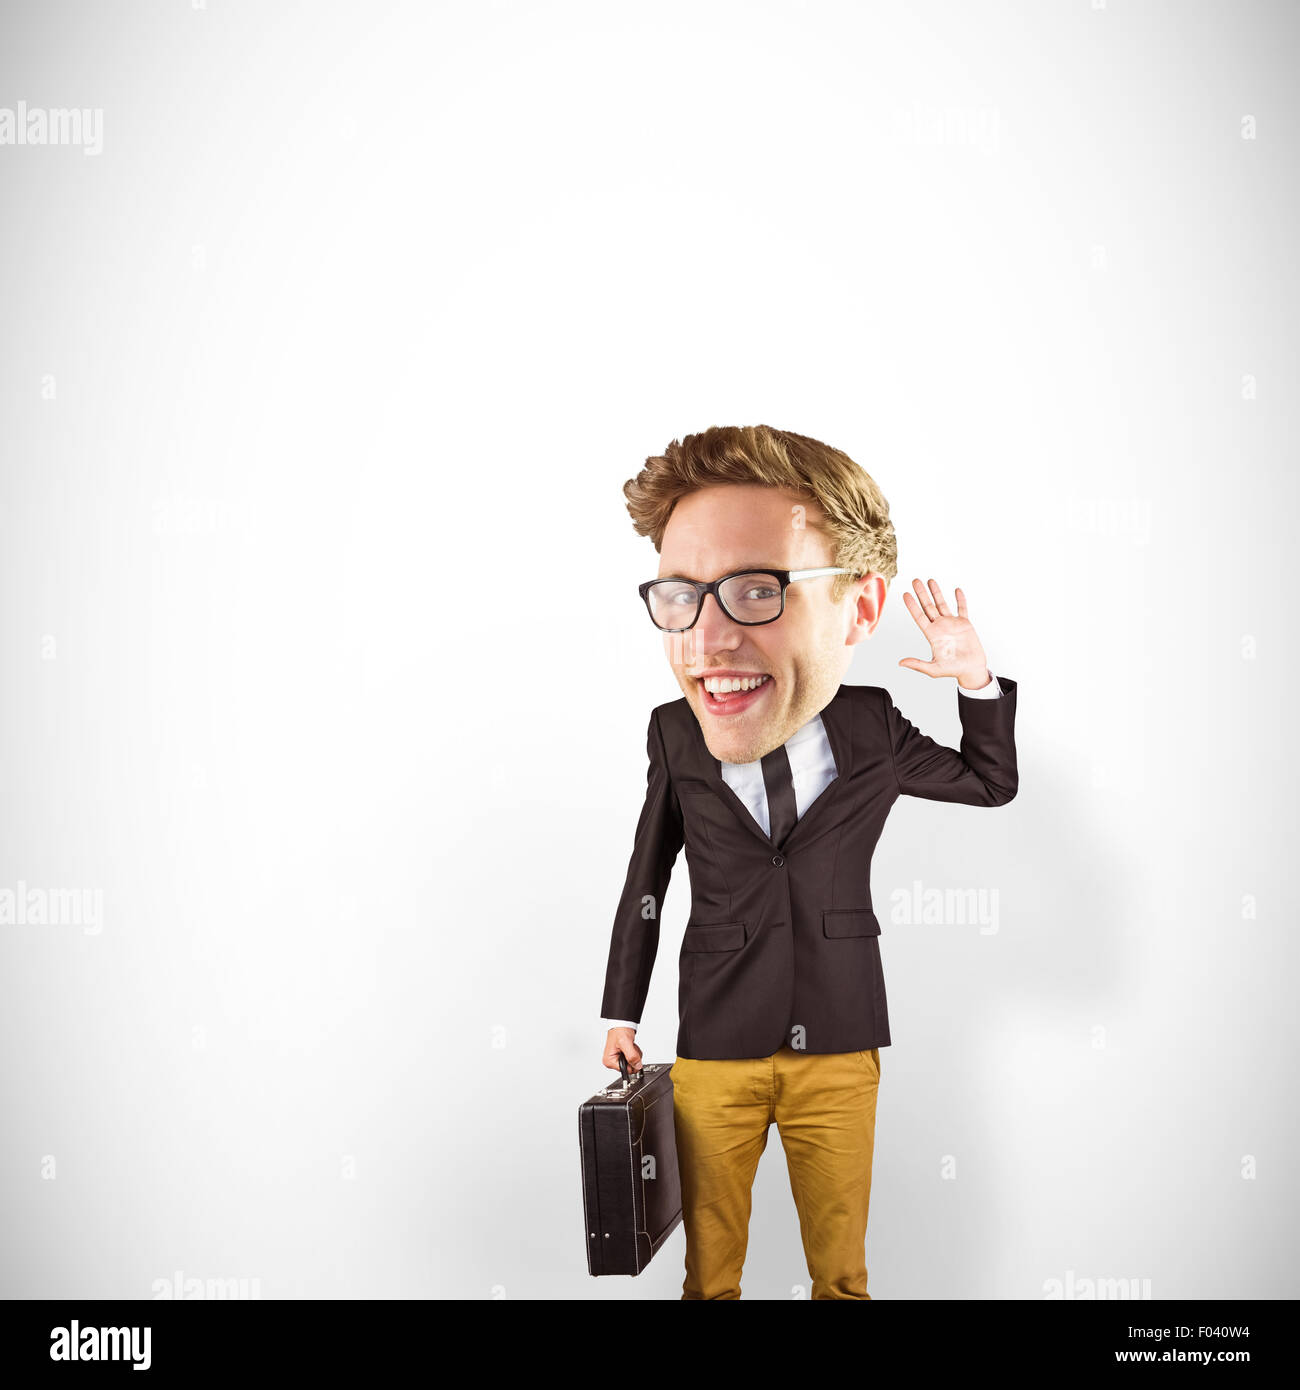 Composite image of nerd smiling and waving Stock Photo